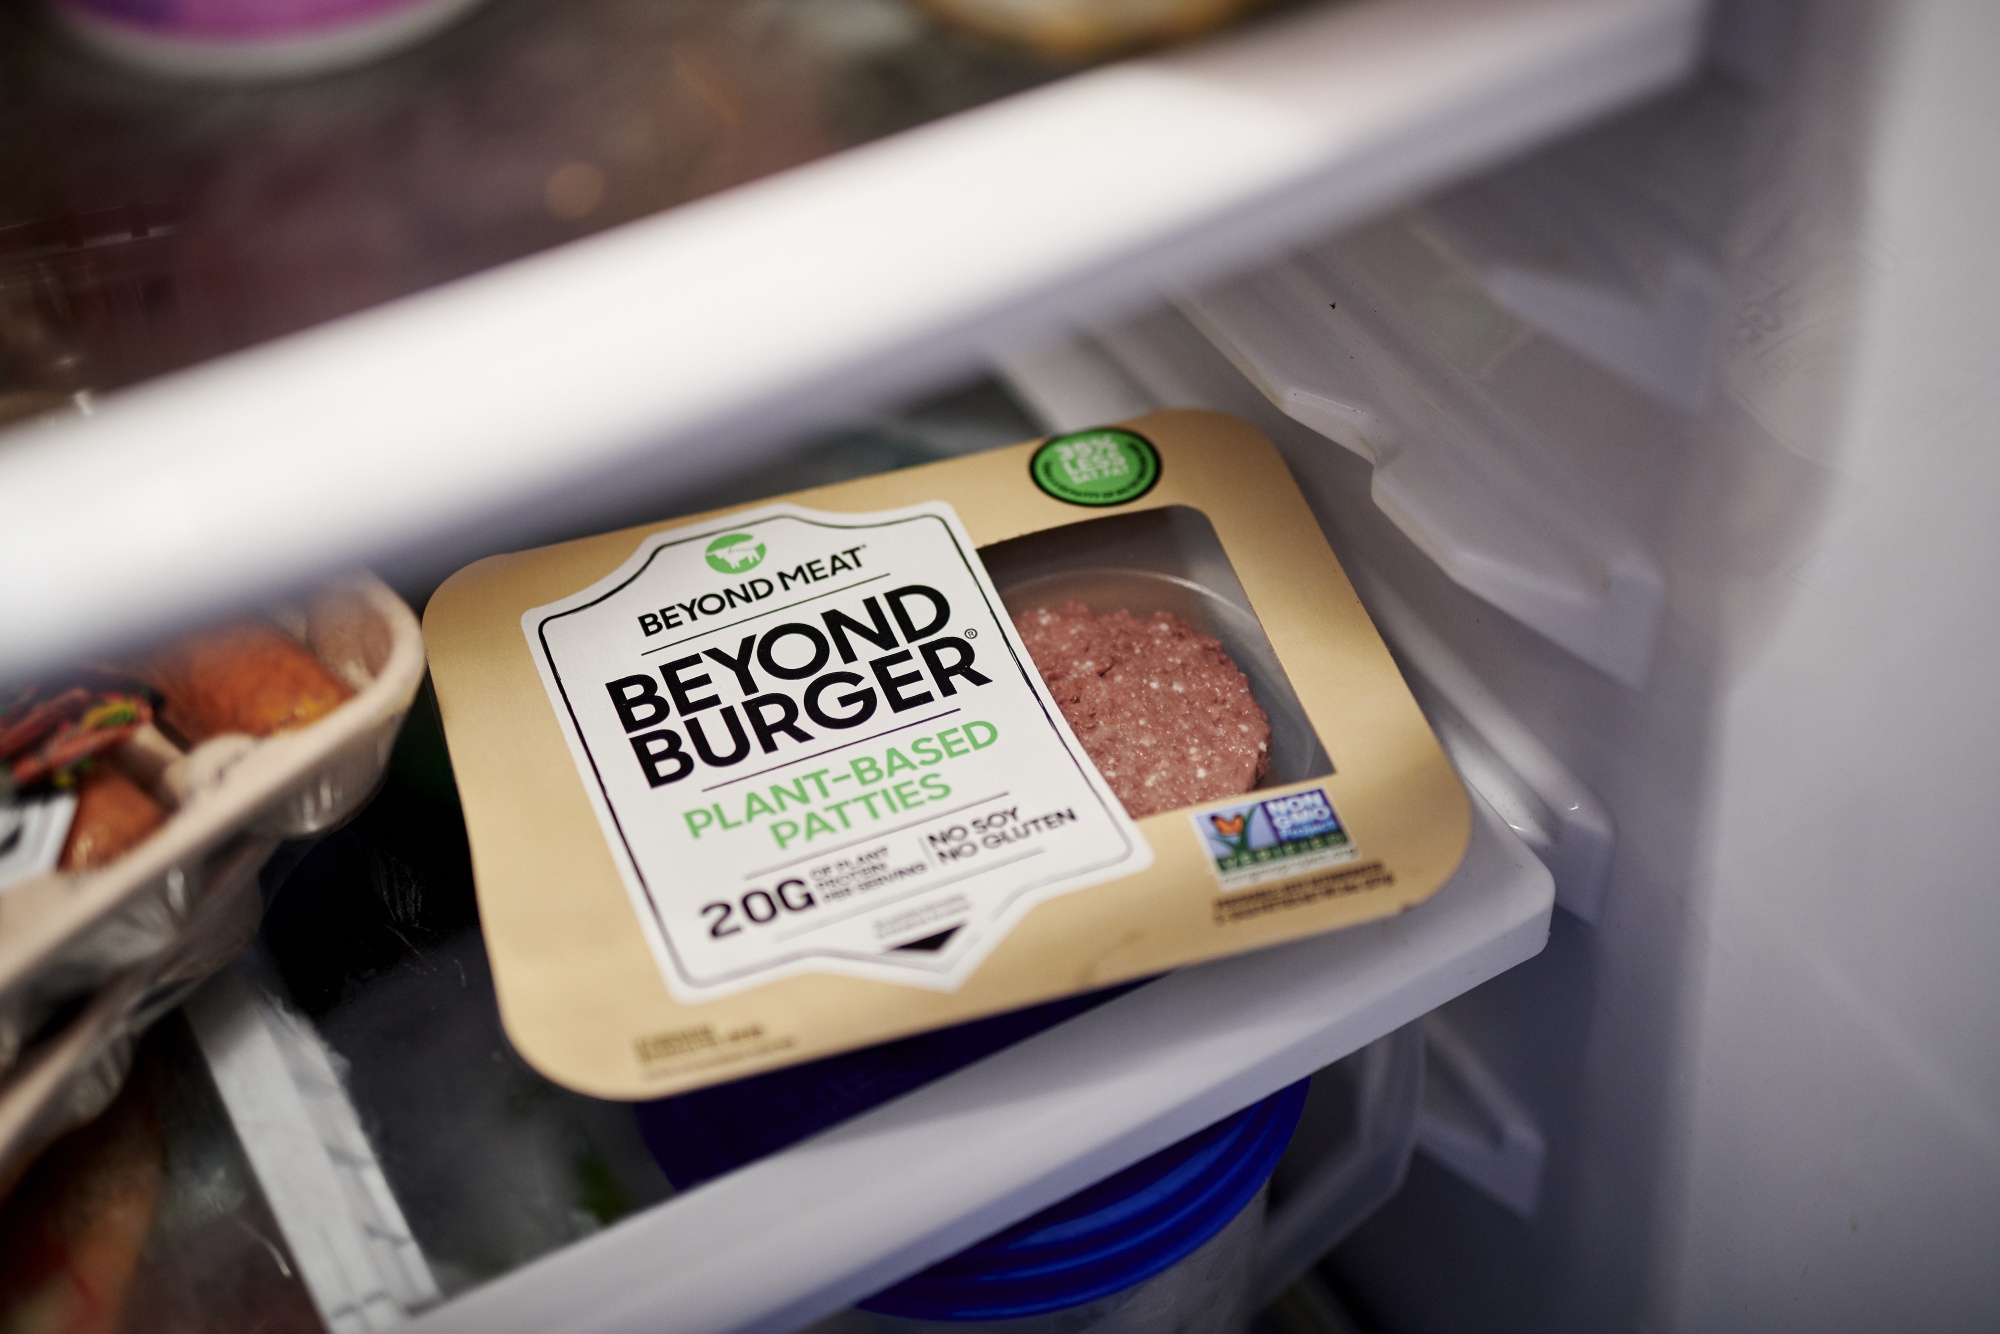 Beyond Meat Expands Product Portfolio at Costco with Addition of